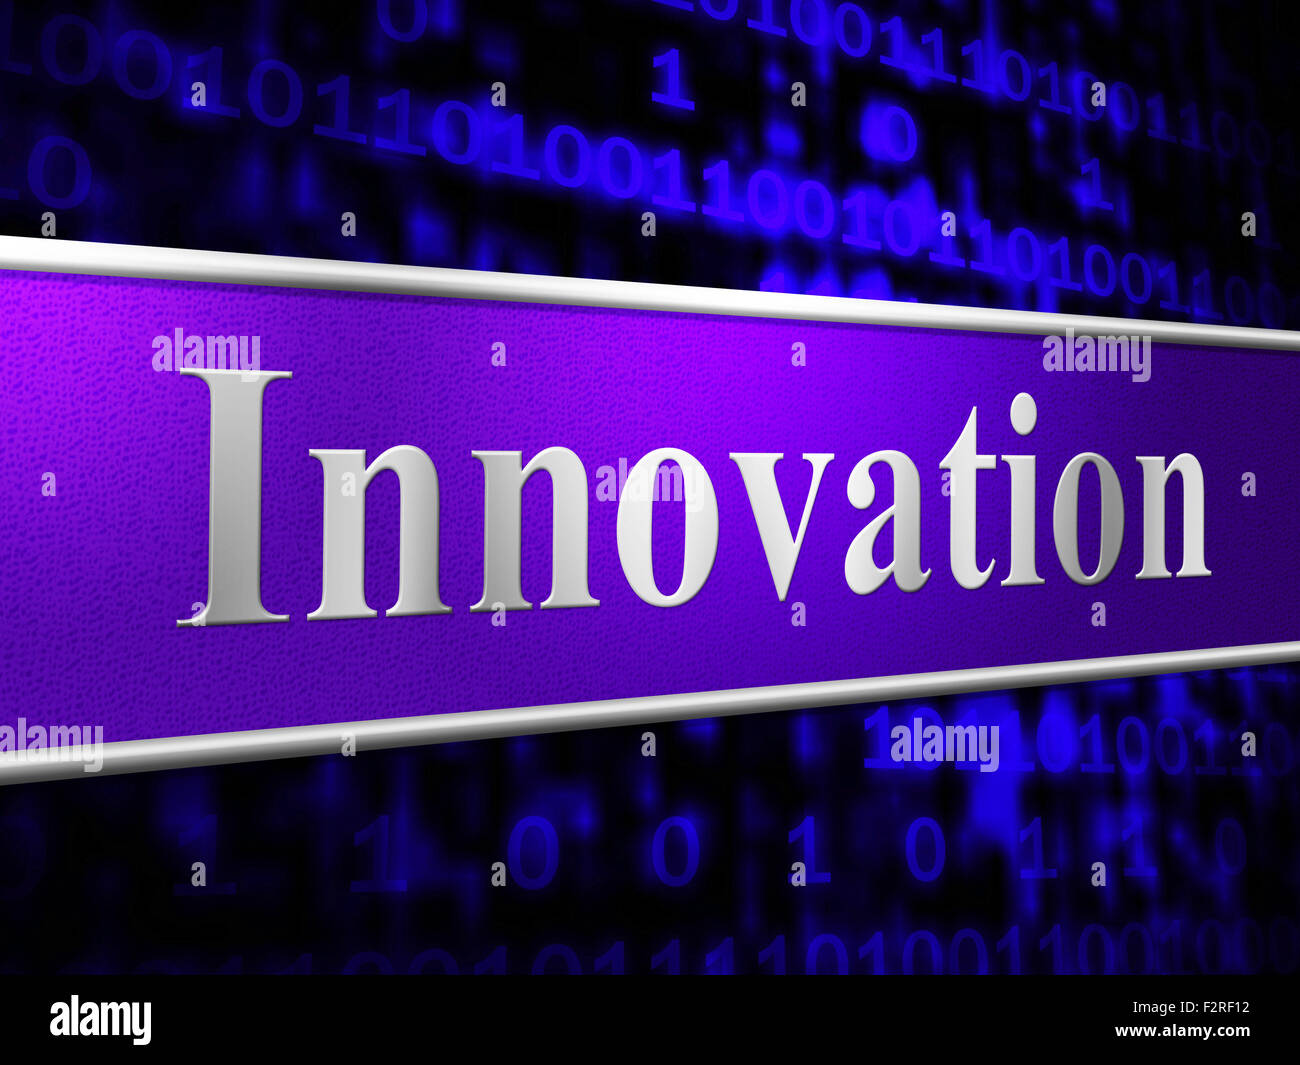 Ideas Innovation Meaning Invention Concepts And Conception Stock Photo